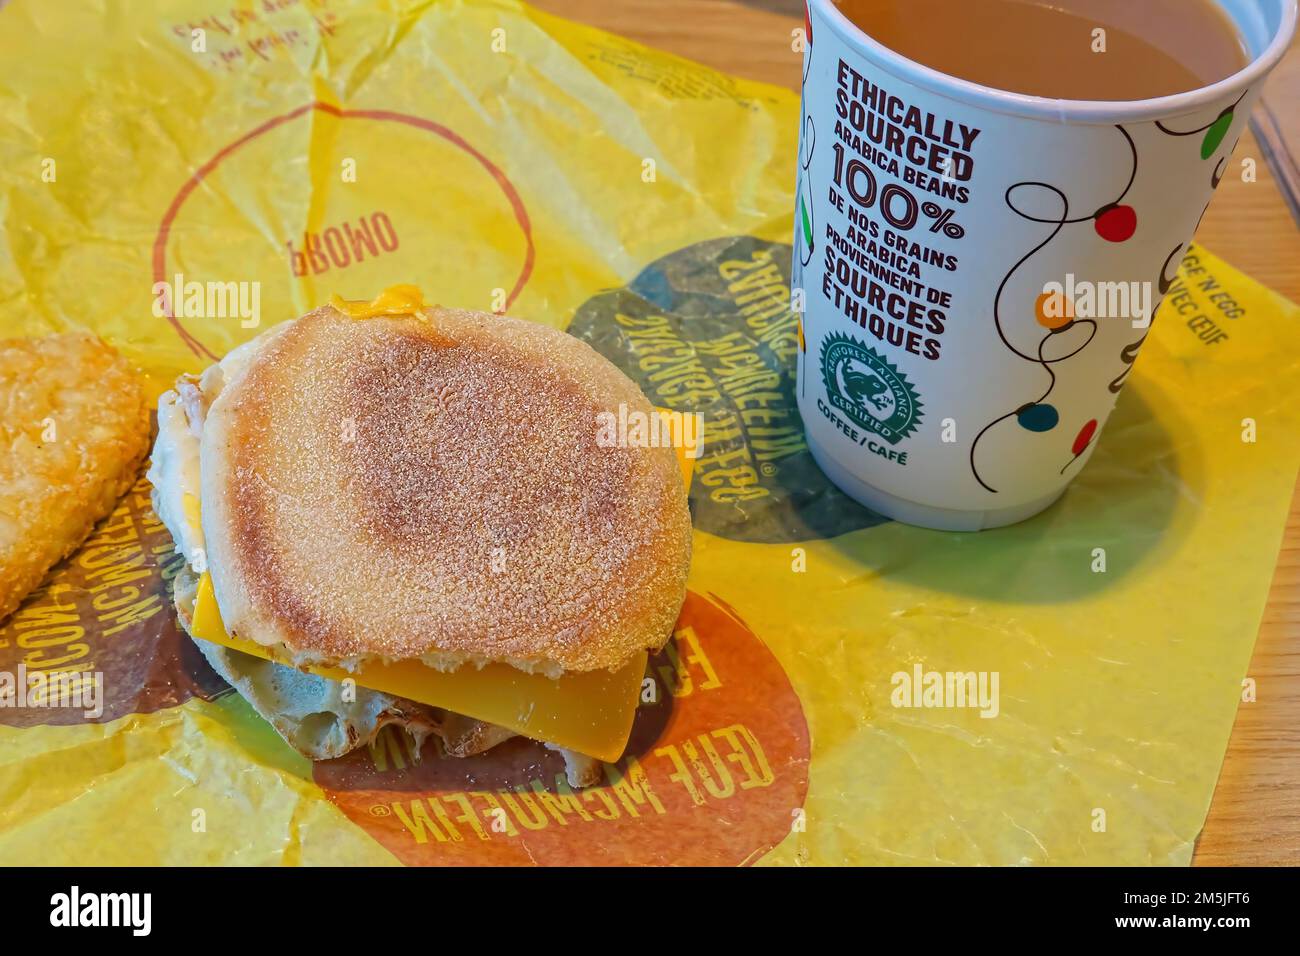 Paper cup of Ethically sourced coffee and Egg McMuffin on a yellow wrapper. Stock Photo